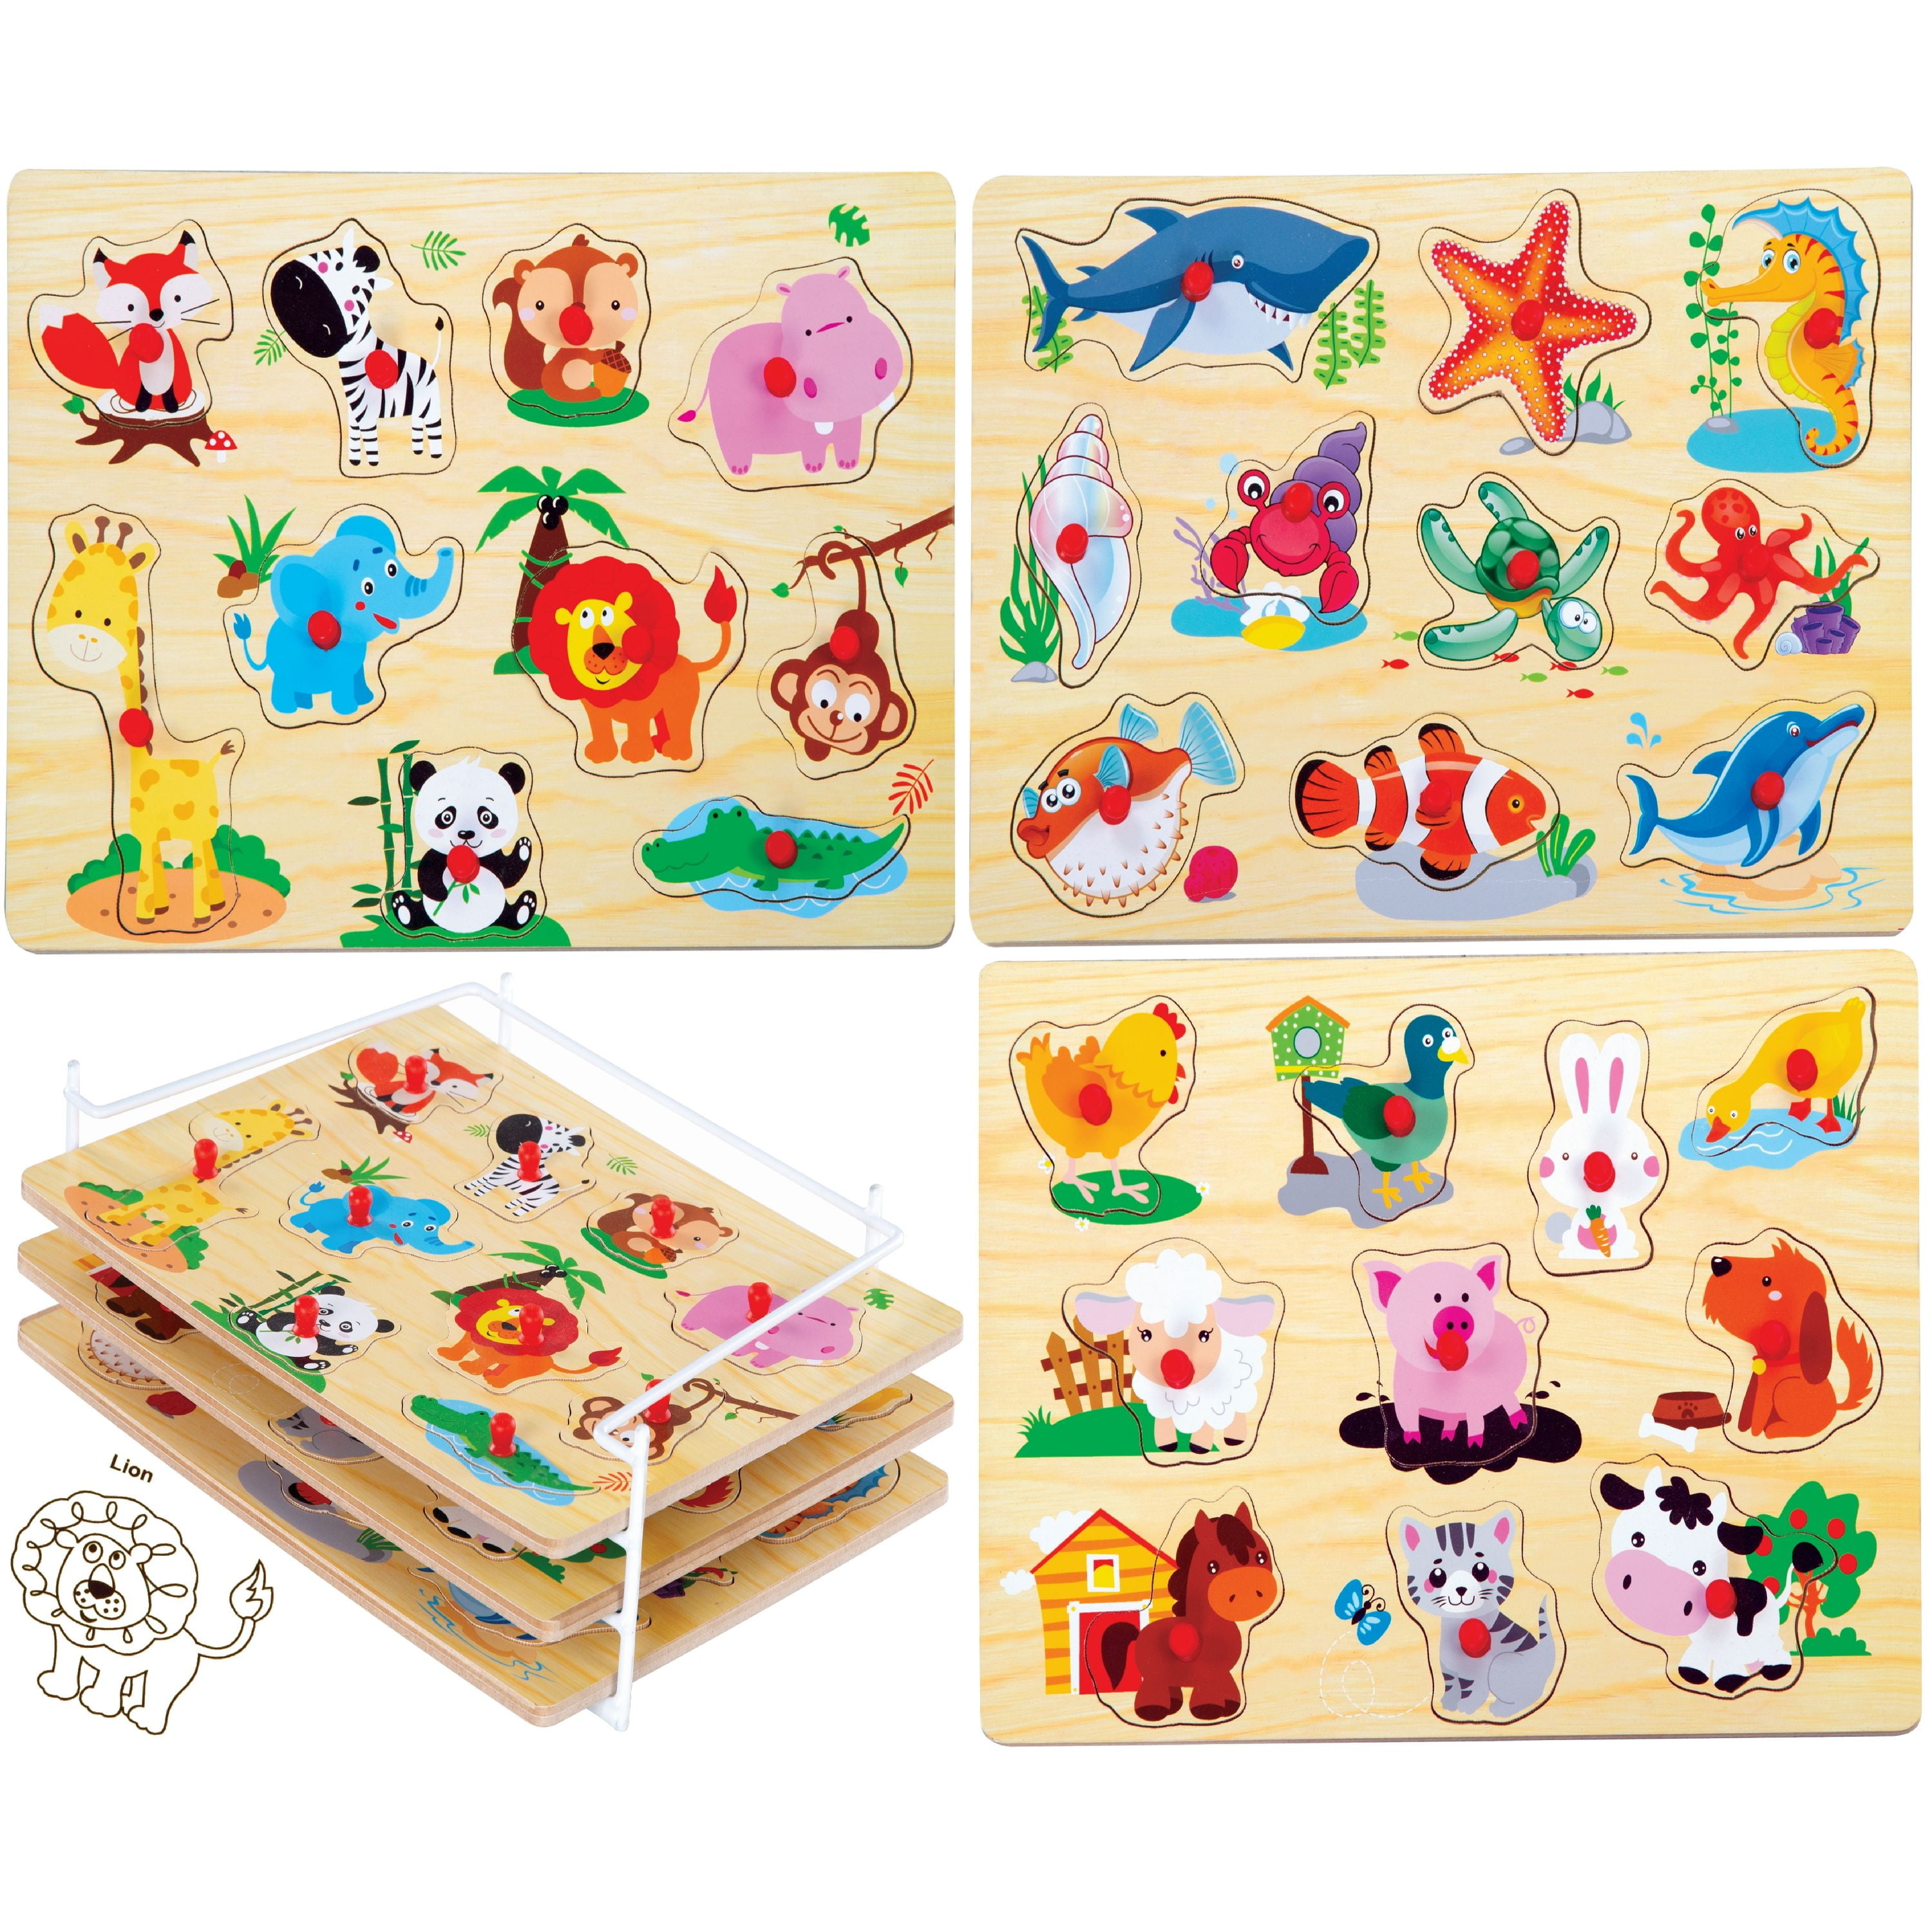 Bundaloo 3 Piece Puzzle Set with Wire Rack - Wooden Animal Puzzles for